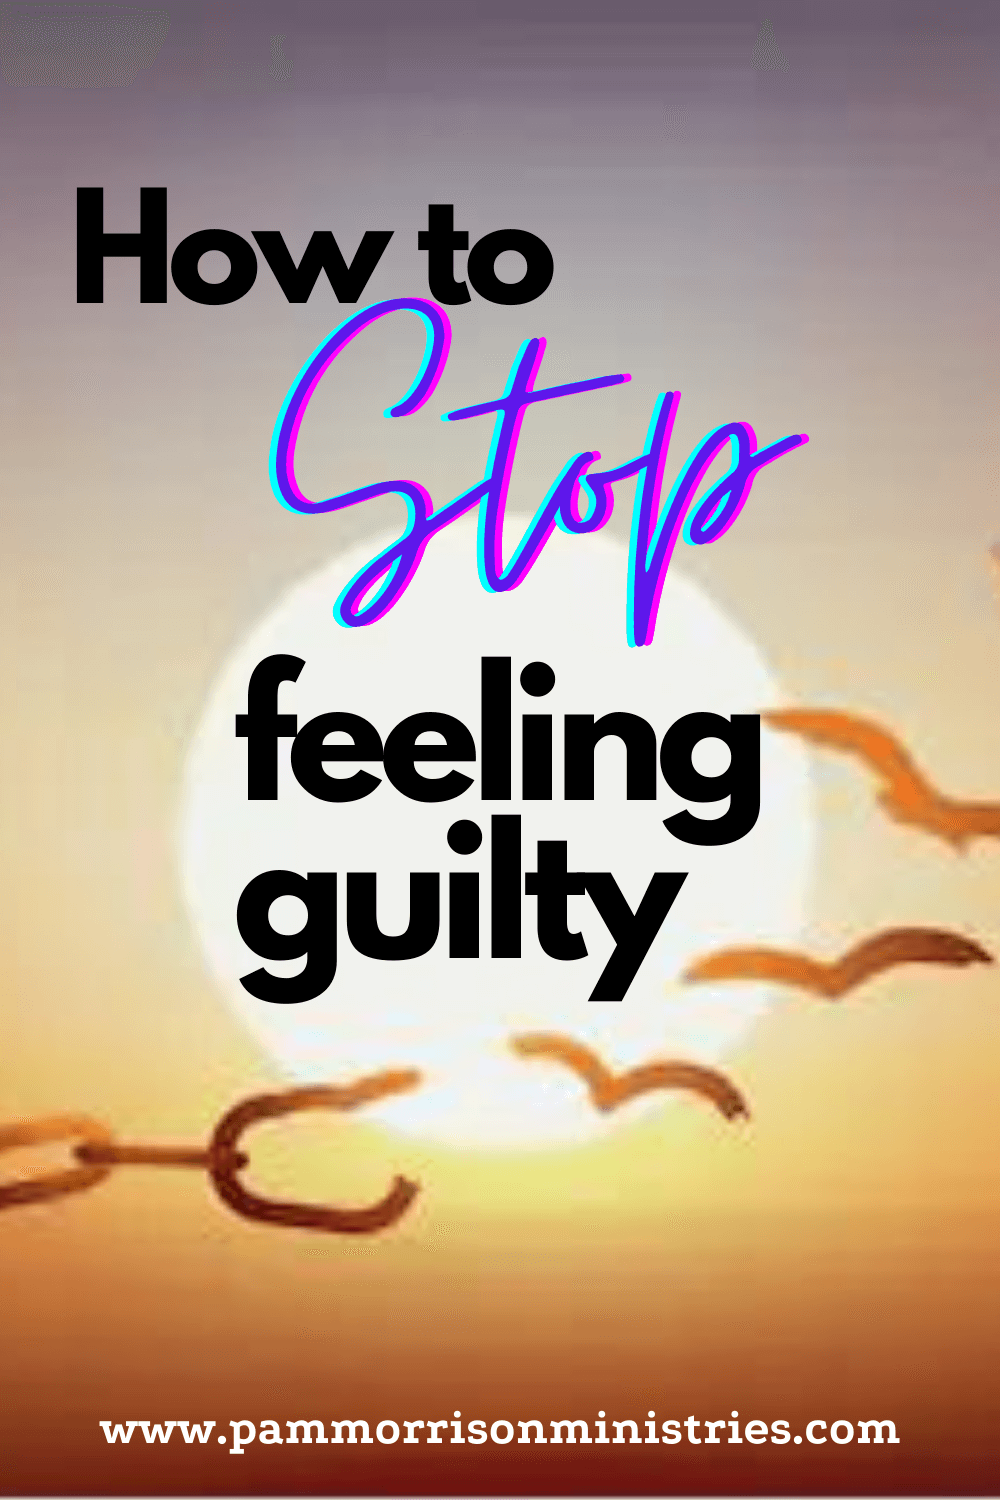 How to stop feeling guilty